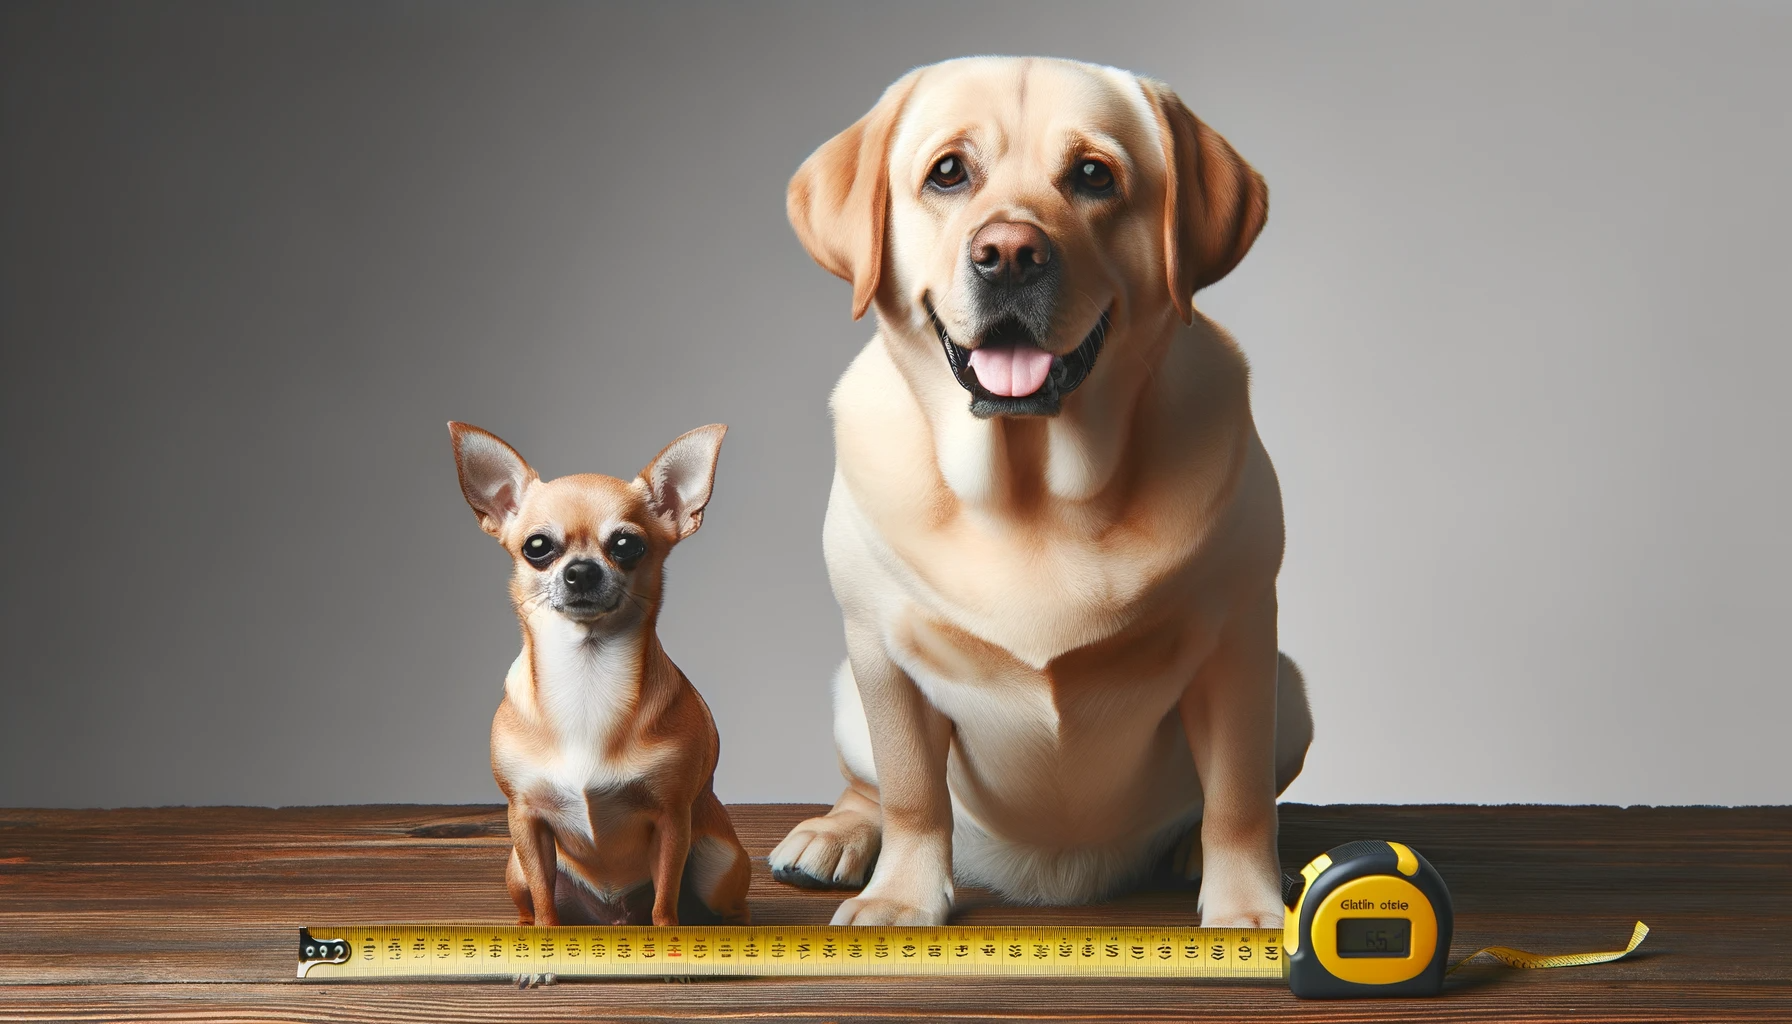 A Labrahuahua sitting proudly next to a measuring tape, showcasing its unique size and proportions